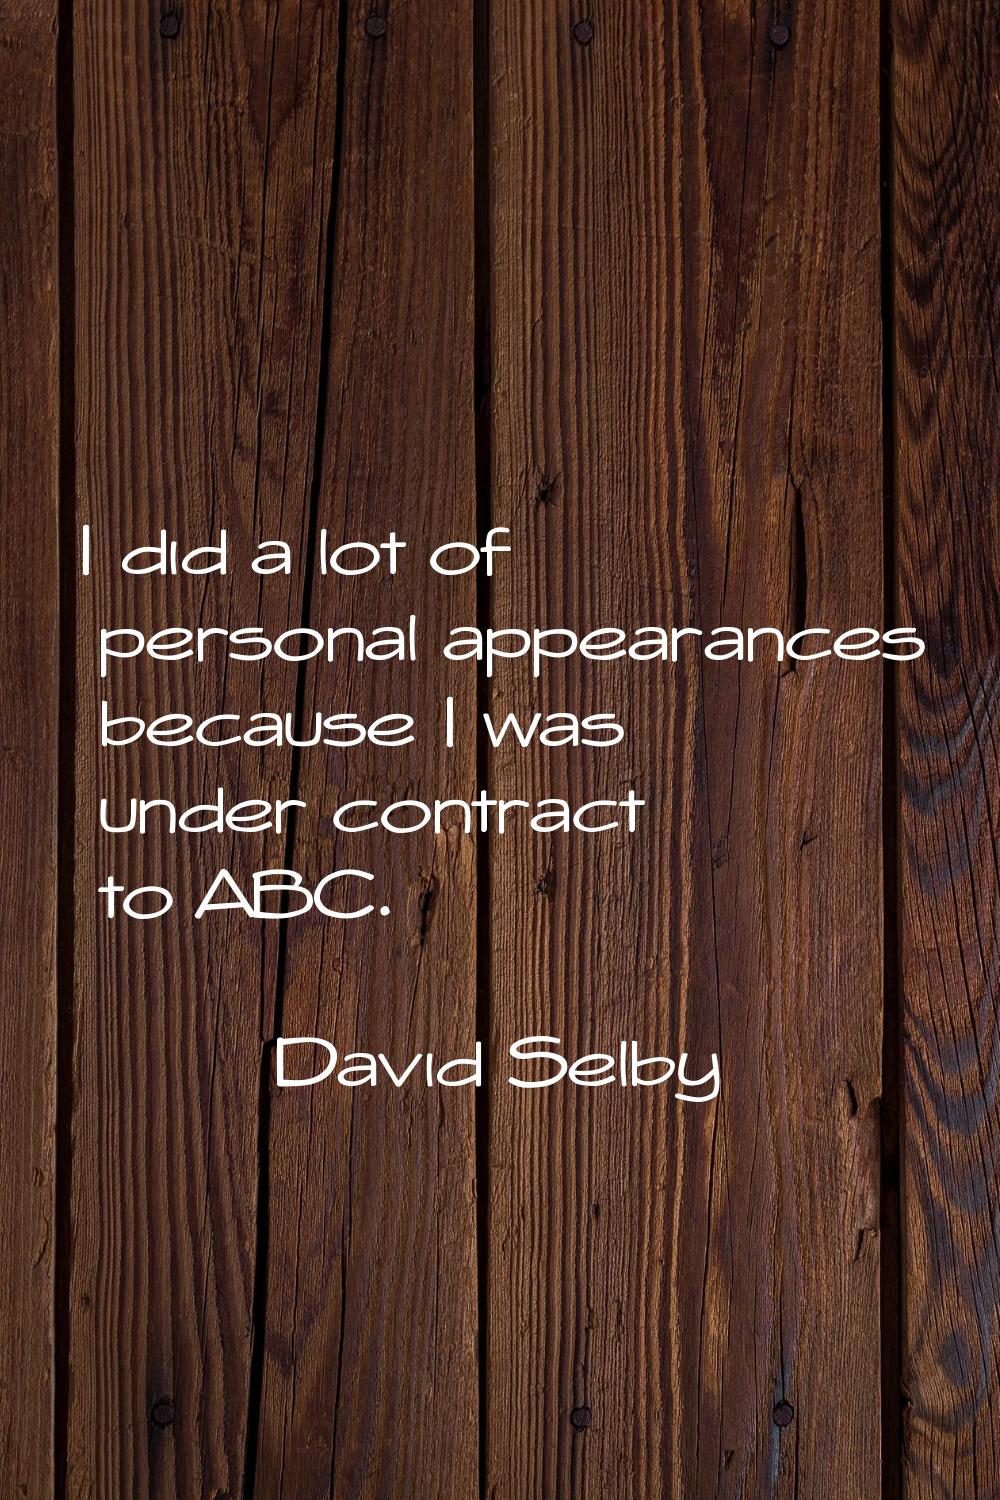 I did a lot of personal appearances because I was under contract to ABC.